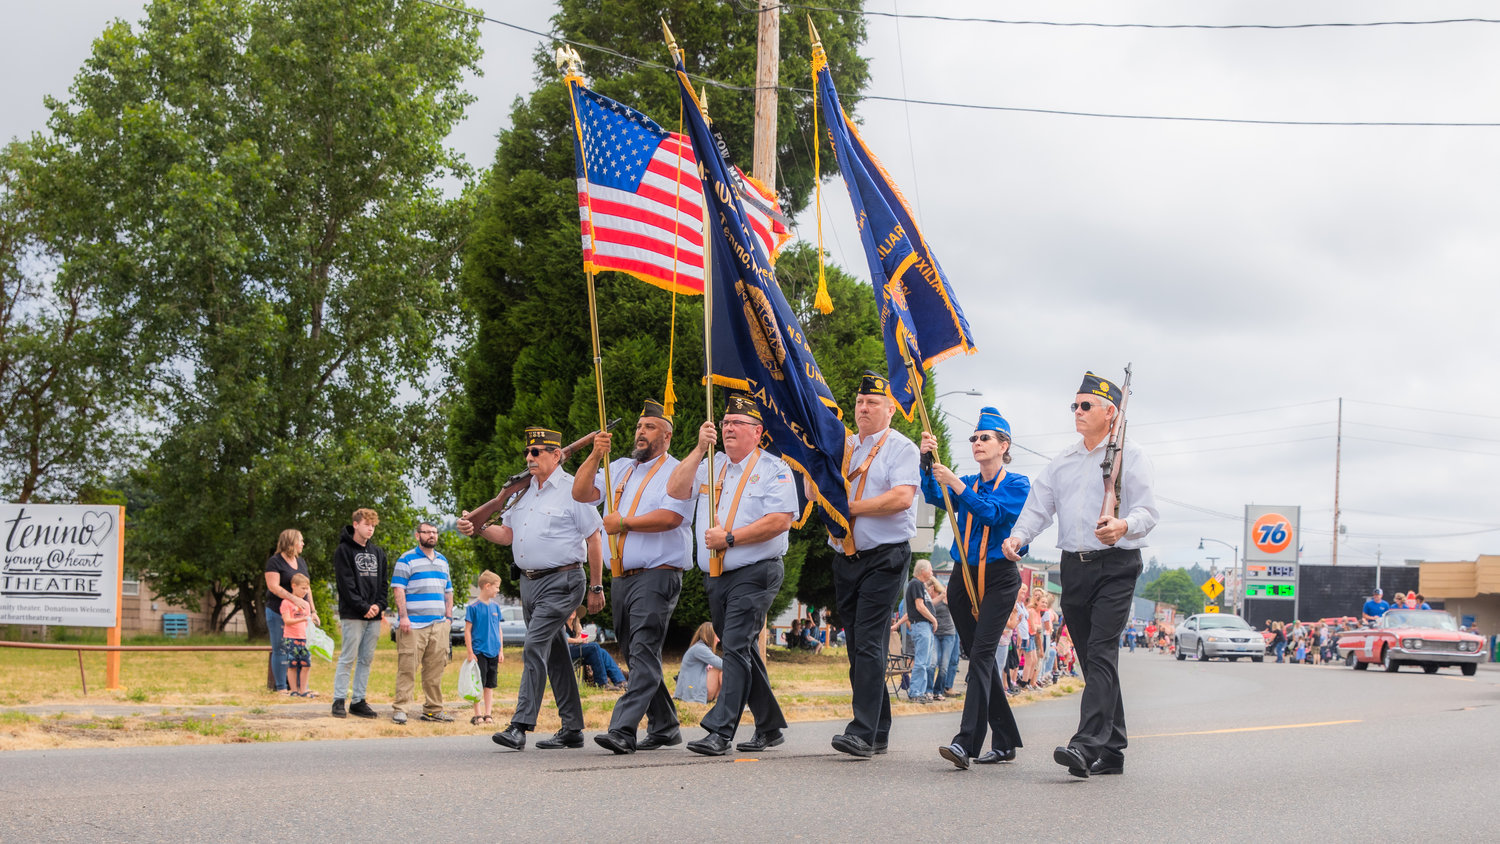 Flags are presented at the start of the Oregon Trail Days parade Saturday morning in Tenino.